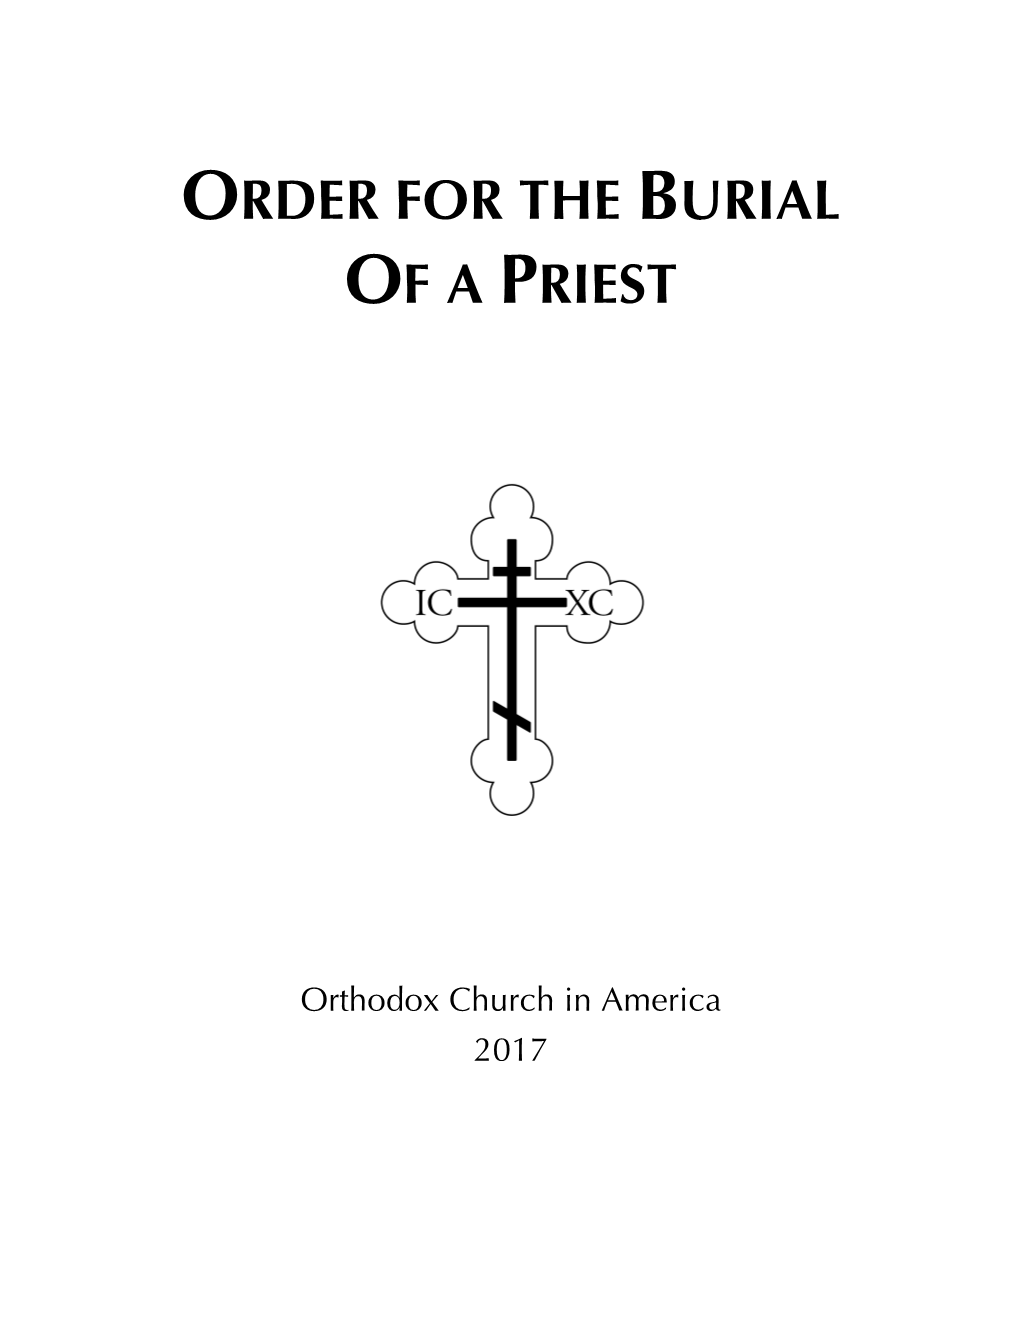 Burial of a Priest